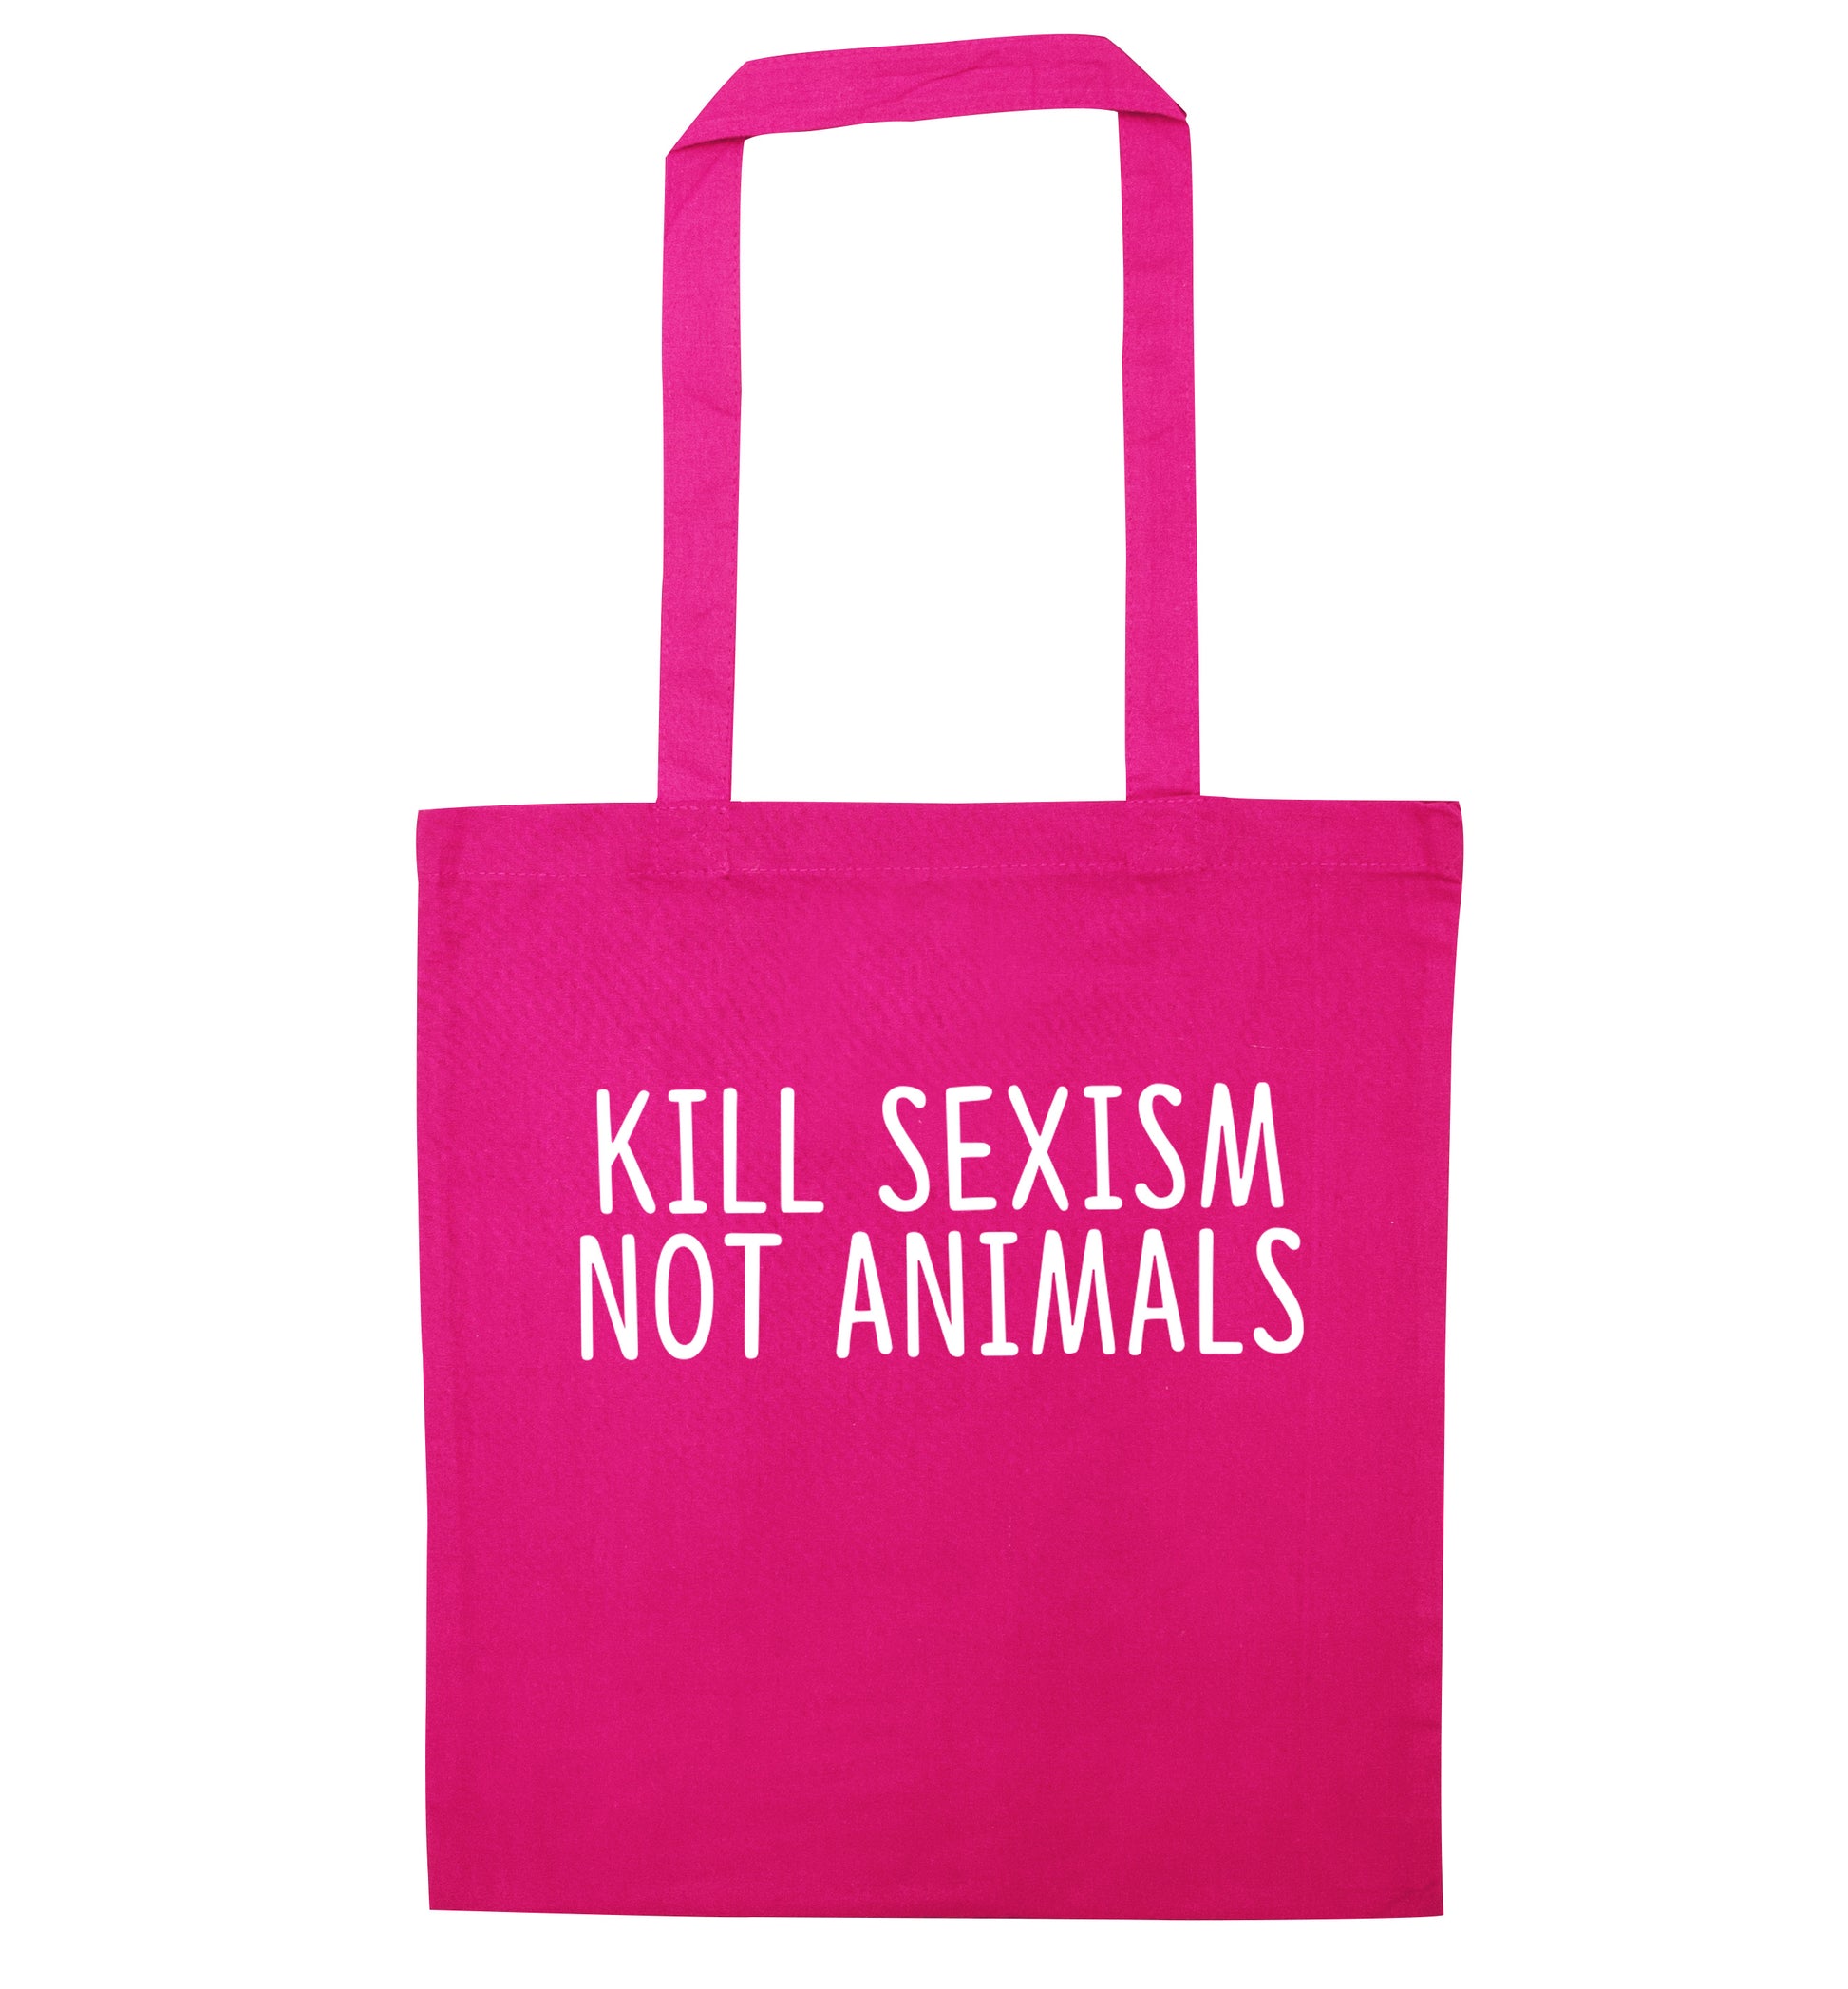 Kill Sexism Not Animals pink tote bag